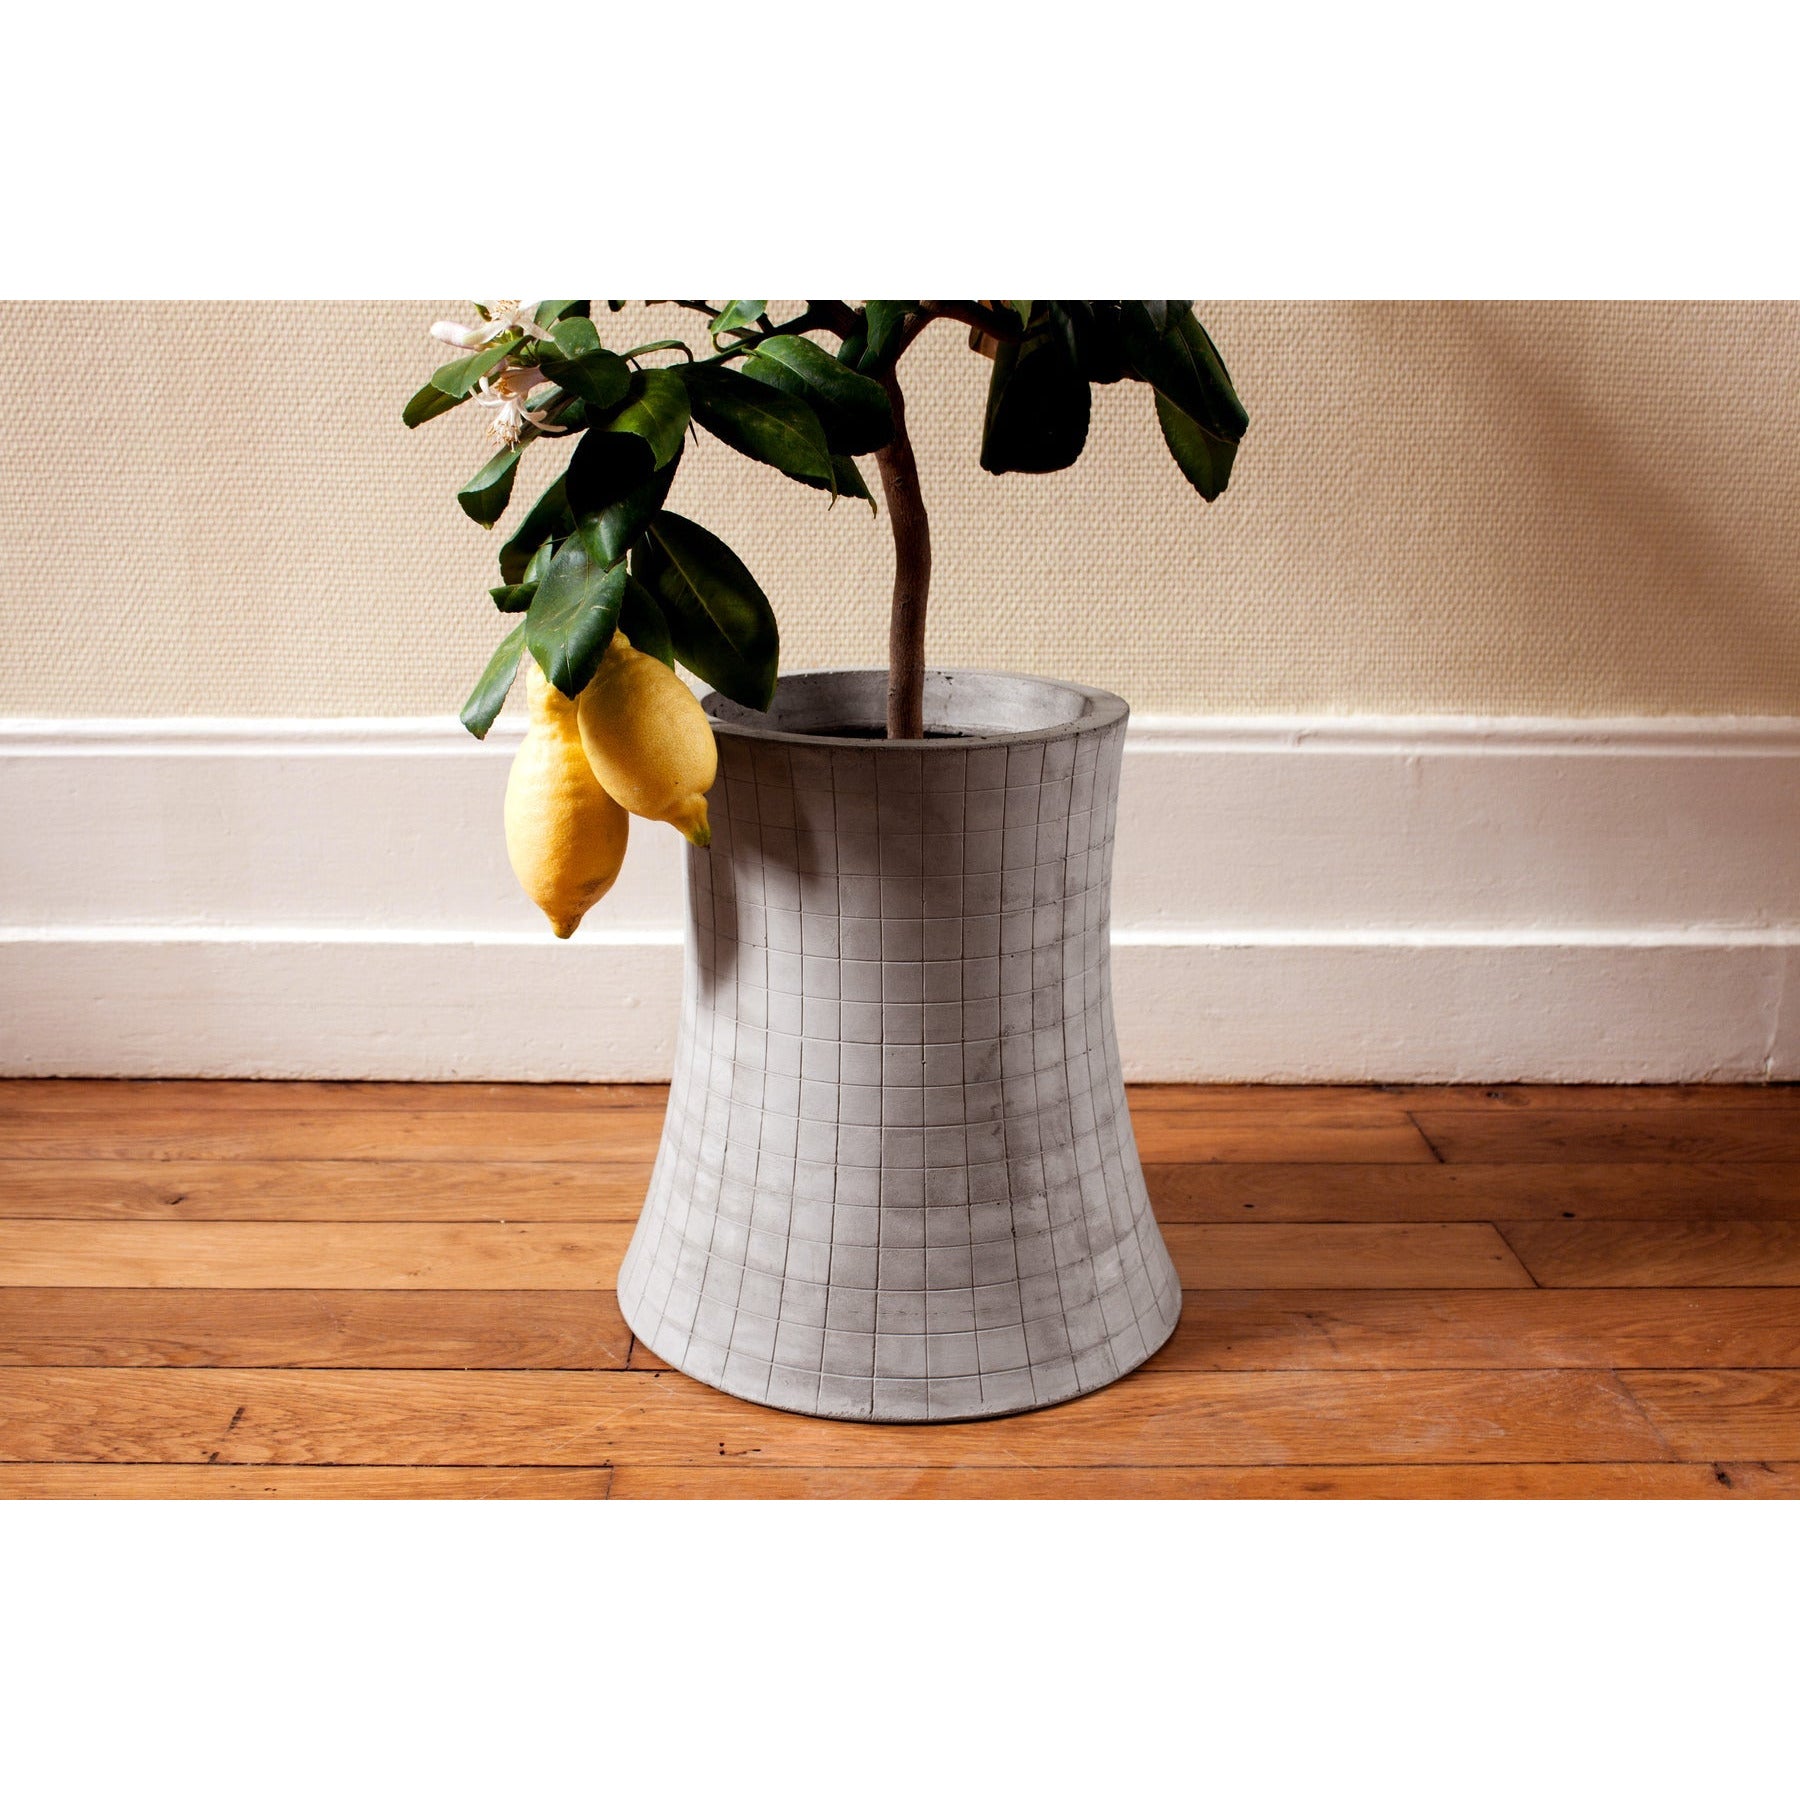 Lyon Beton Nuclear Plant Large Flower Pot made from Concrete | Modern Furniture + Decor